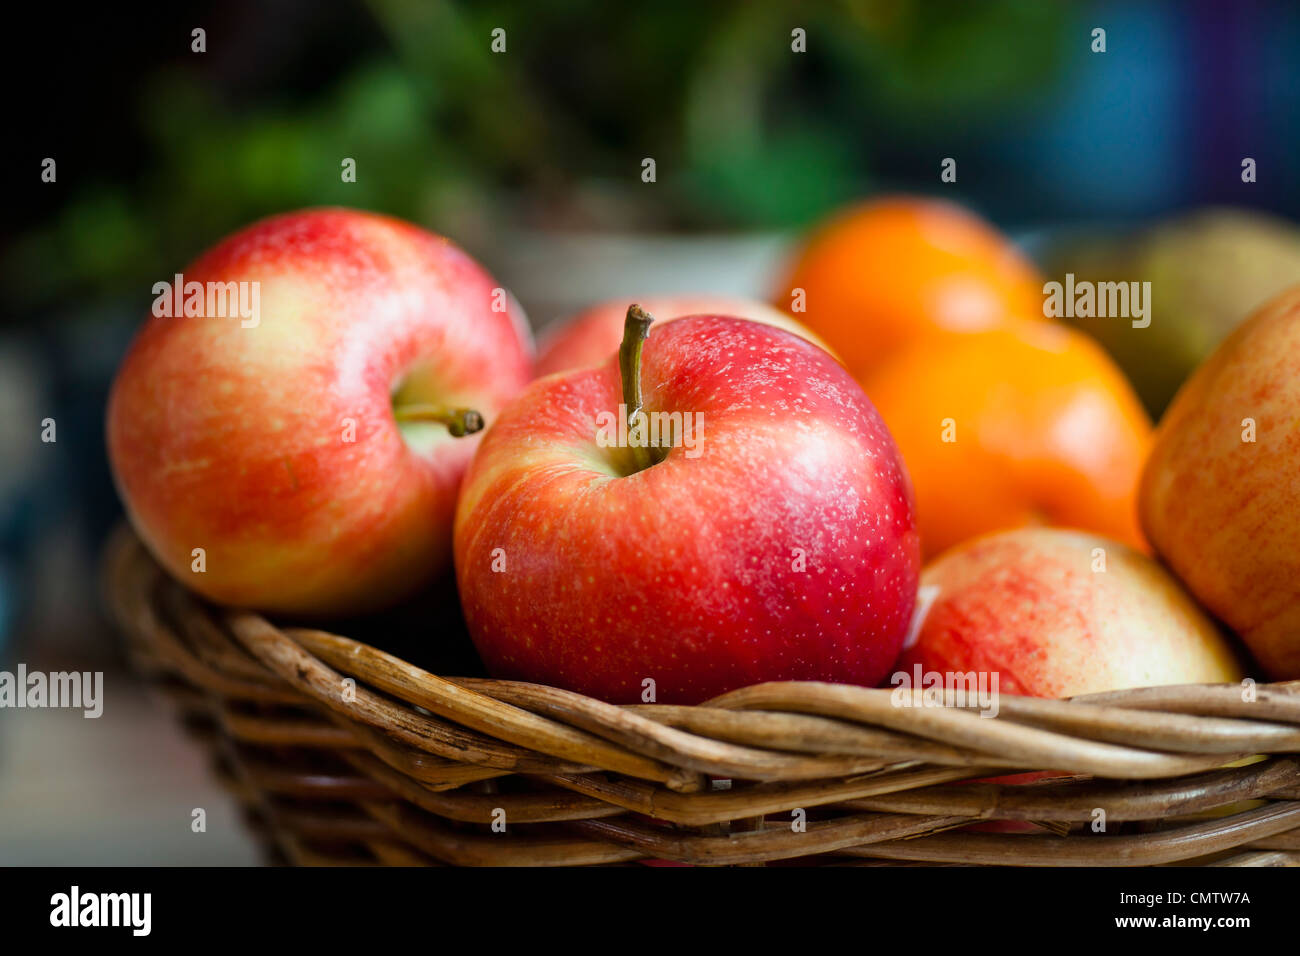 Basket filled with apples Stock Photo